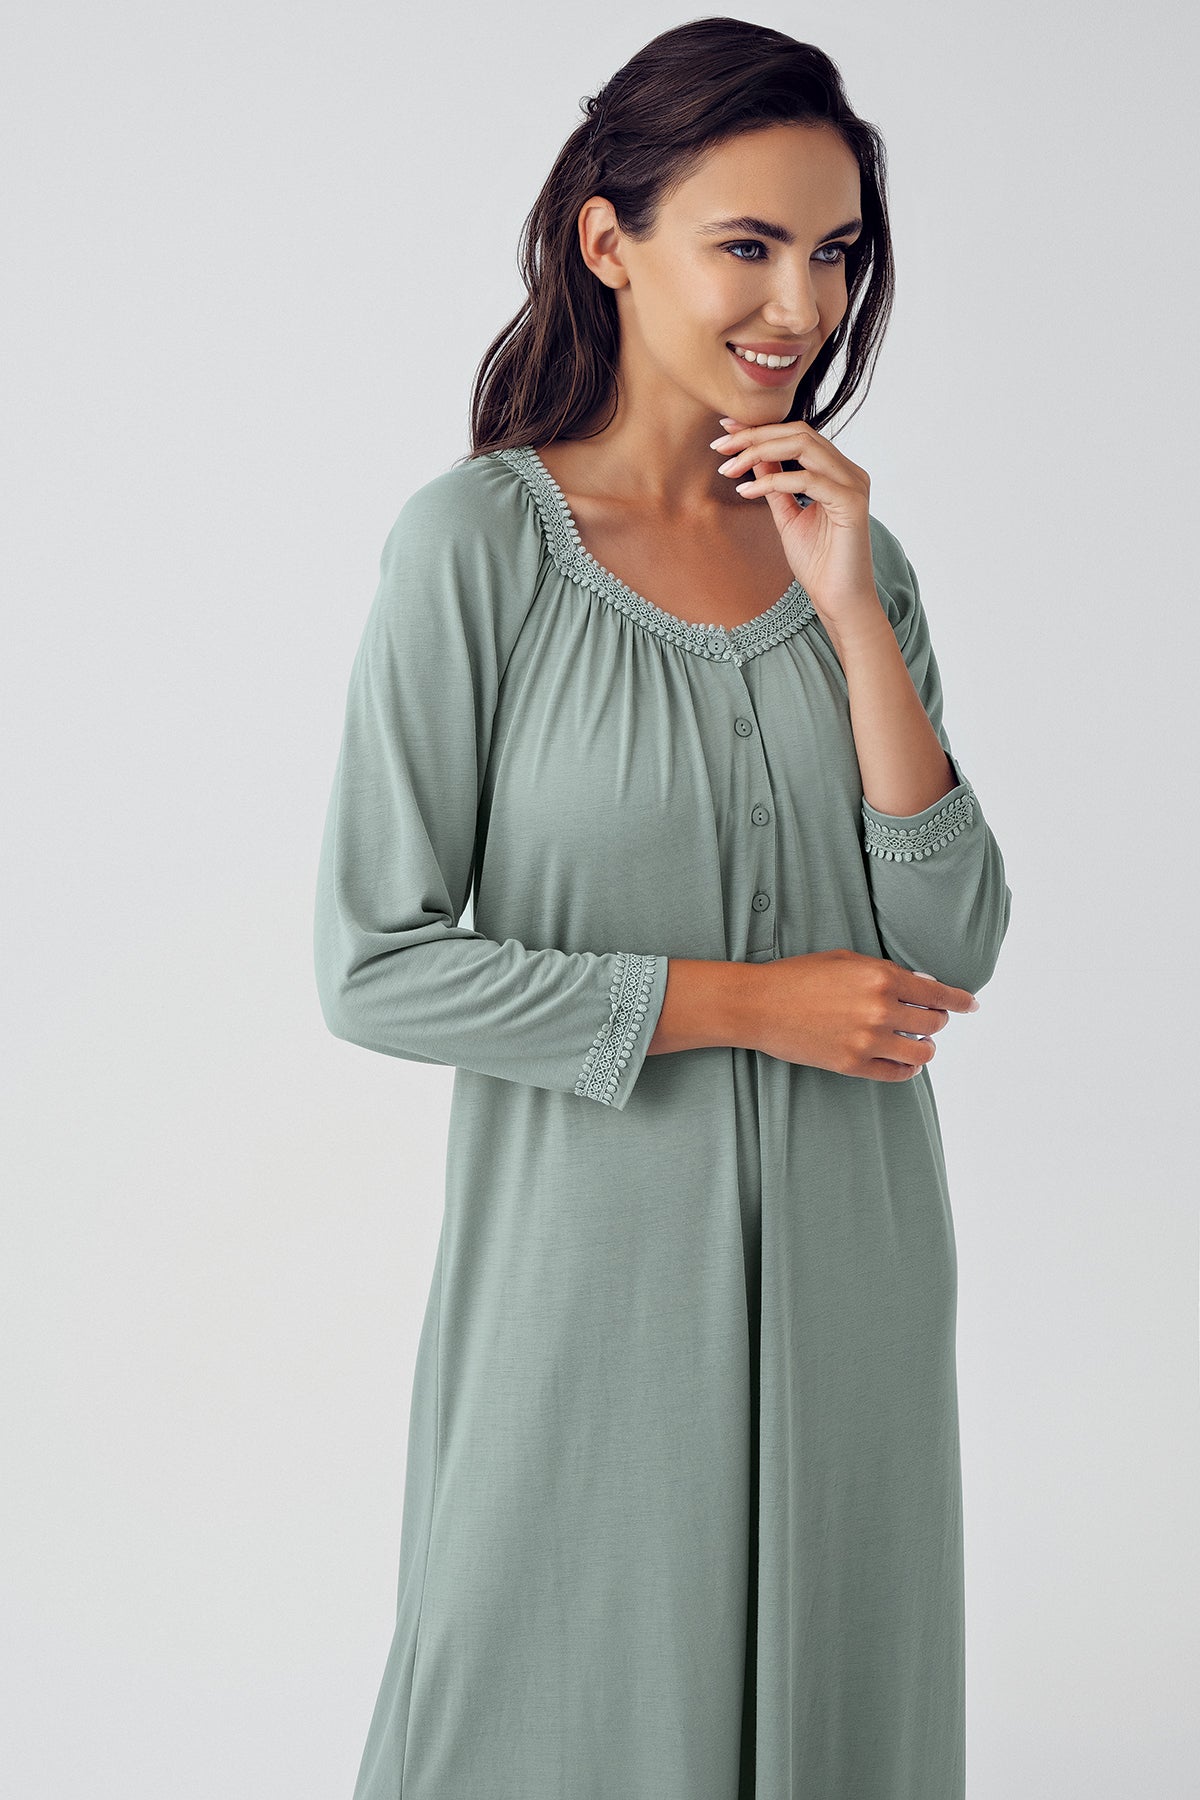 Shopymommy 15119 Square Collar Plus Size Maternity & Nursing Nightgown Green